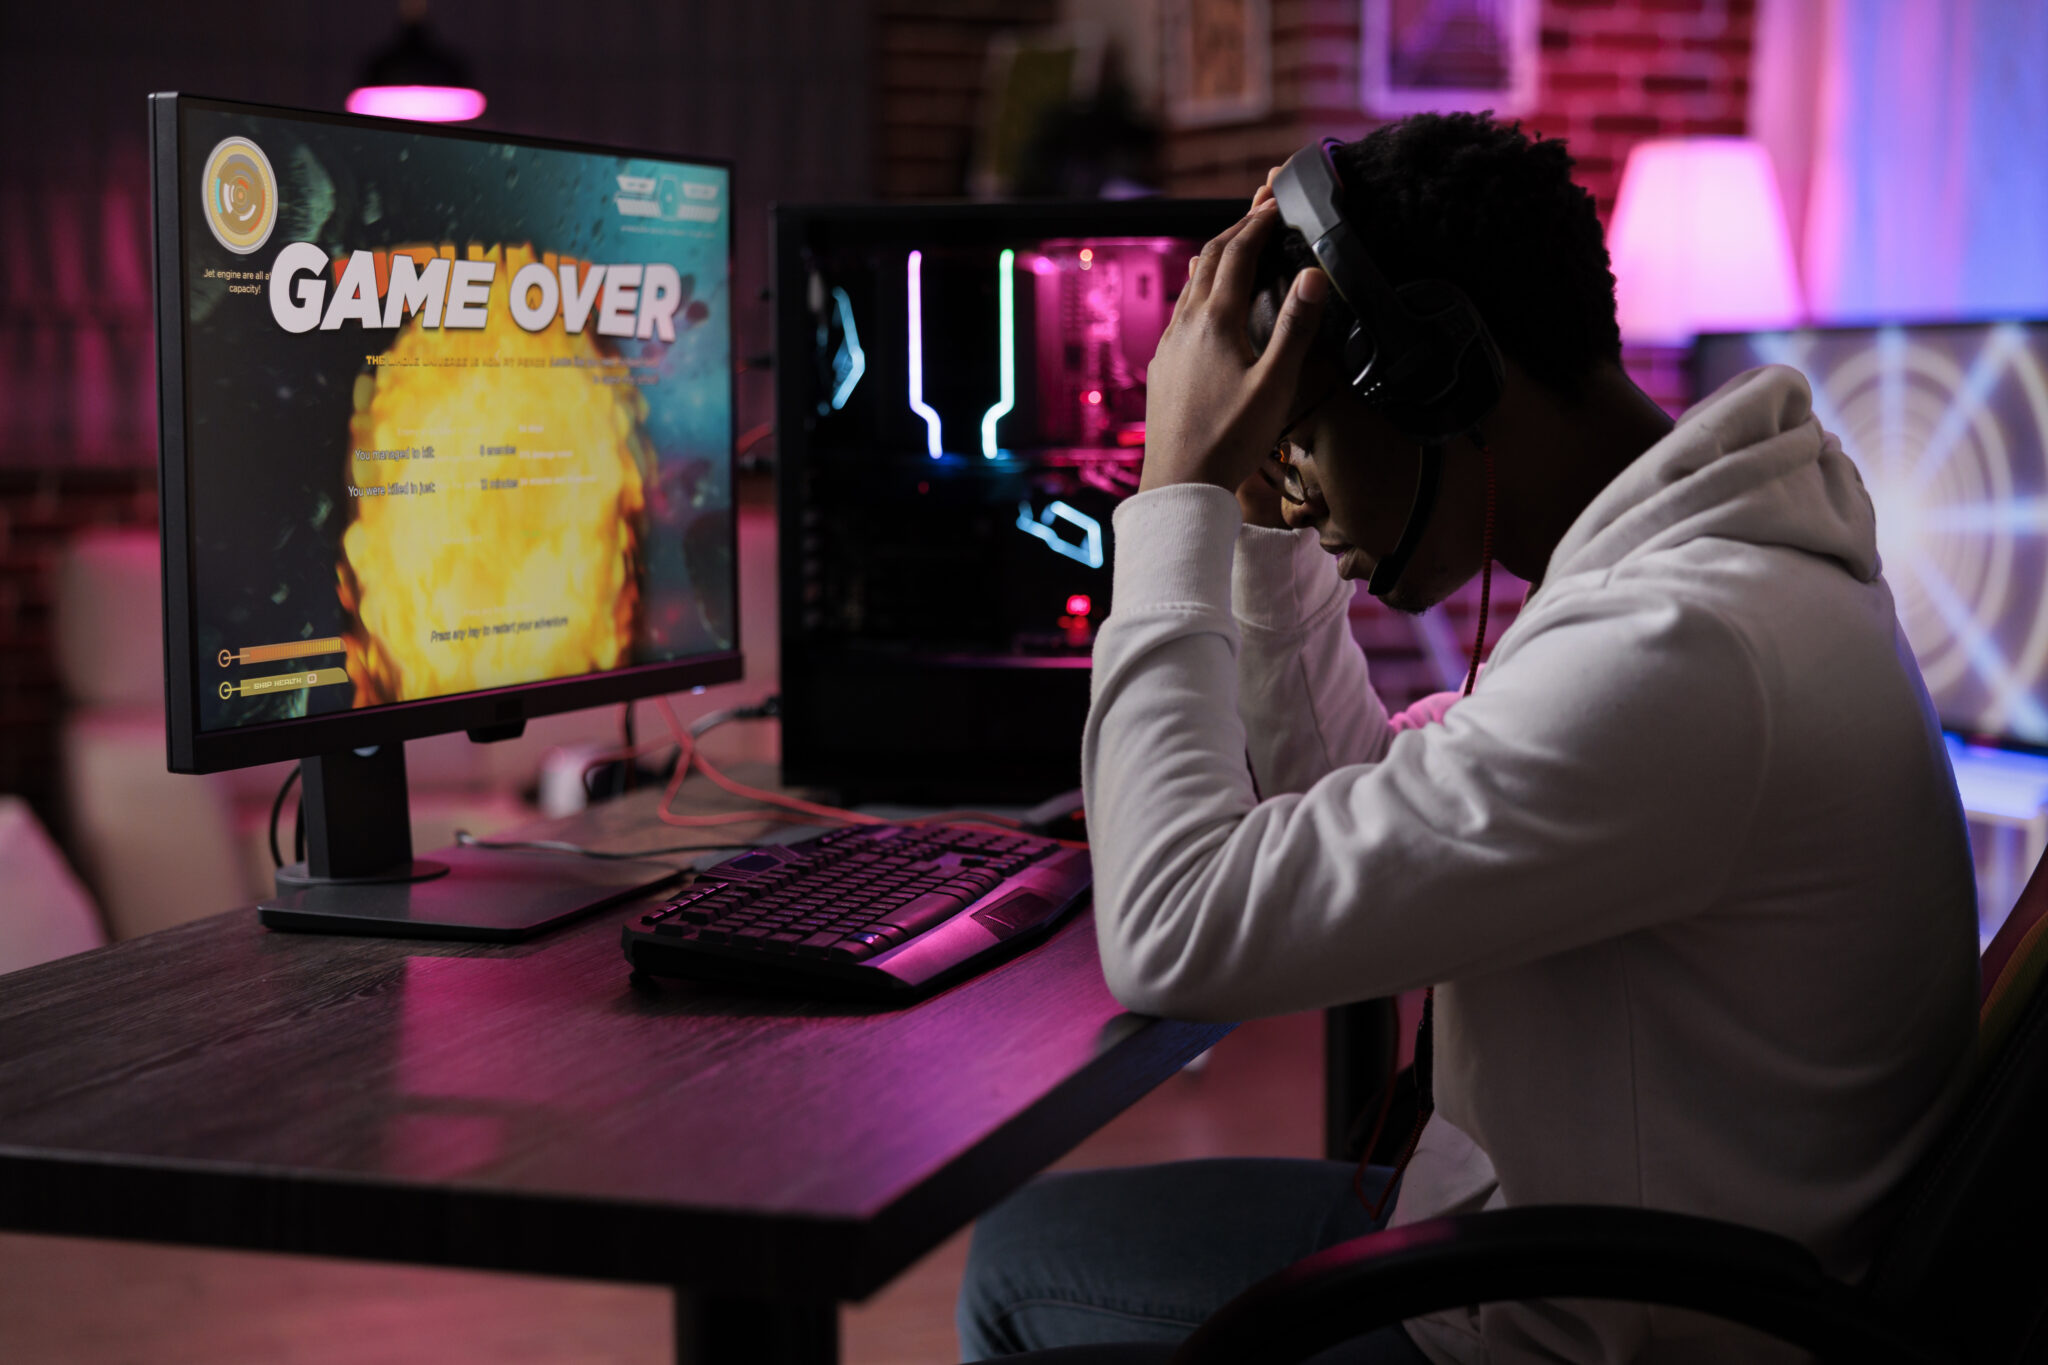 5 Gaming Issues faced by daily gamers